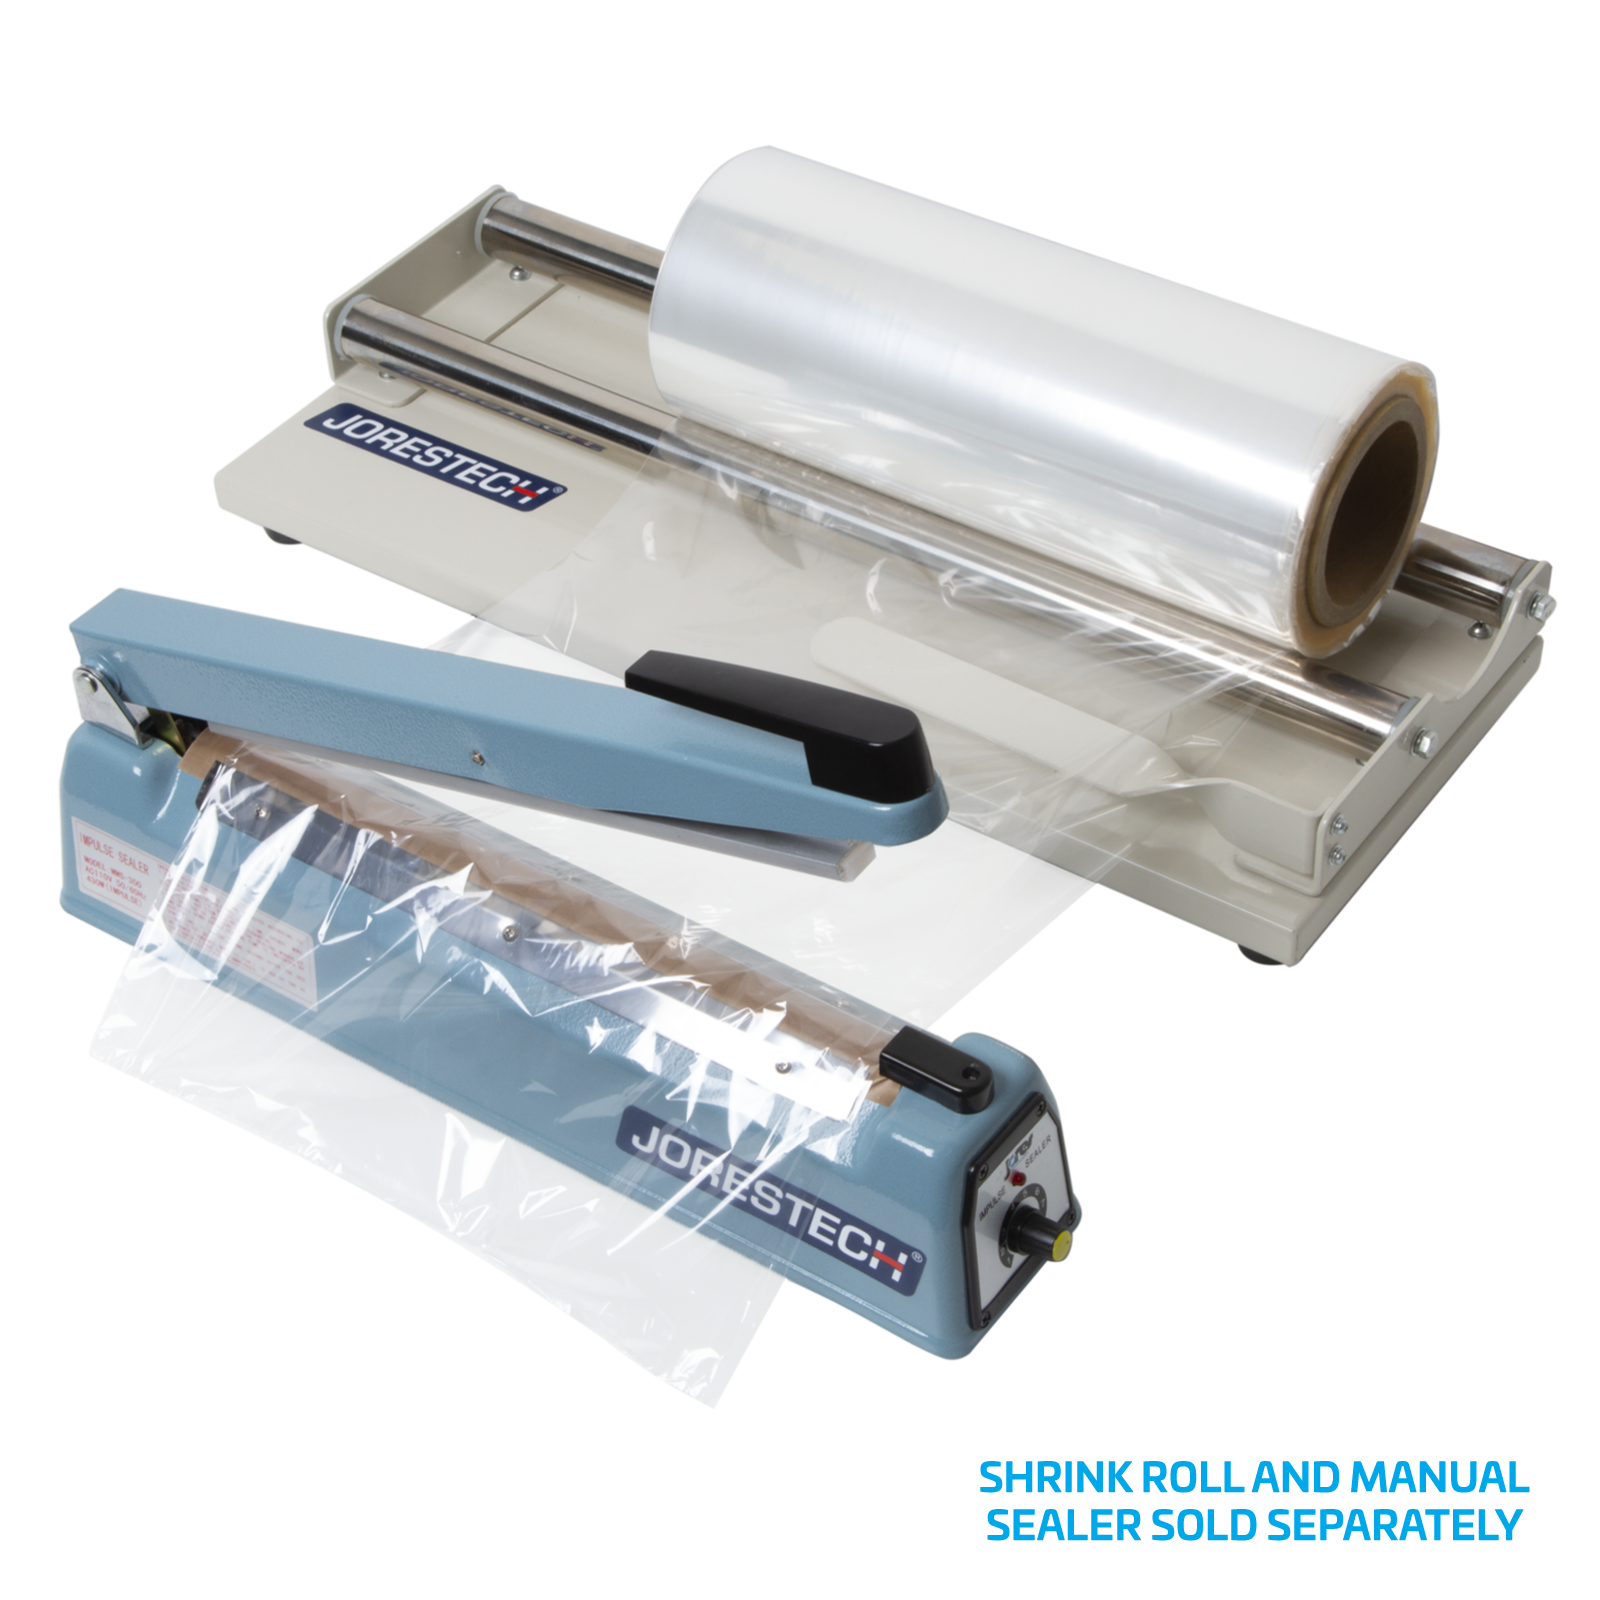 The plastic roll dispenser with a shrink roll on top and a manual impulse sealer ready to seal the plastic. Shrink roll and manual sealer sold separately